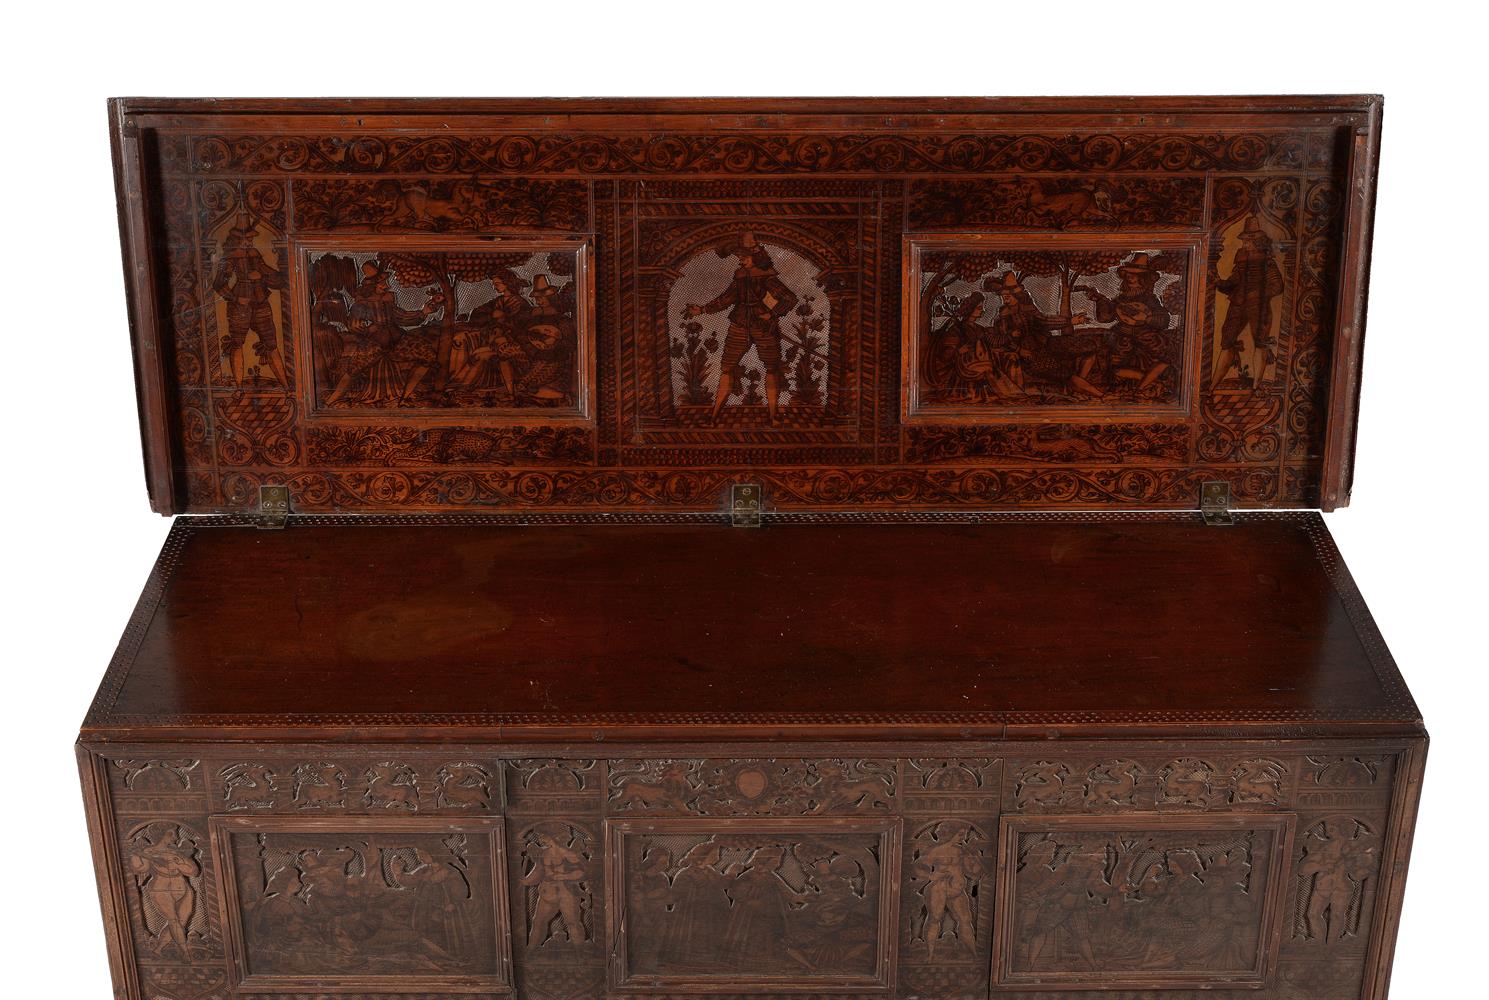 AN ITALIAN CARVED AND POKERWORK DECORATED CHEST OR CASSONE, 16TH CENTURY AND LATER - Image 8 of 12